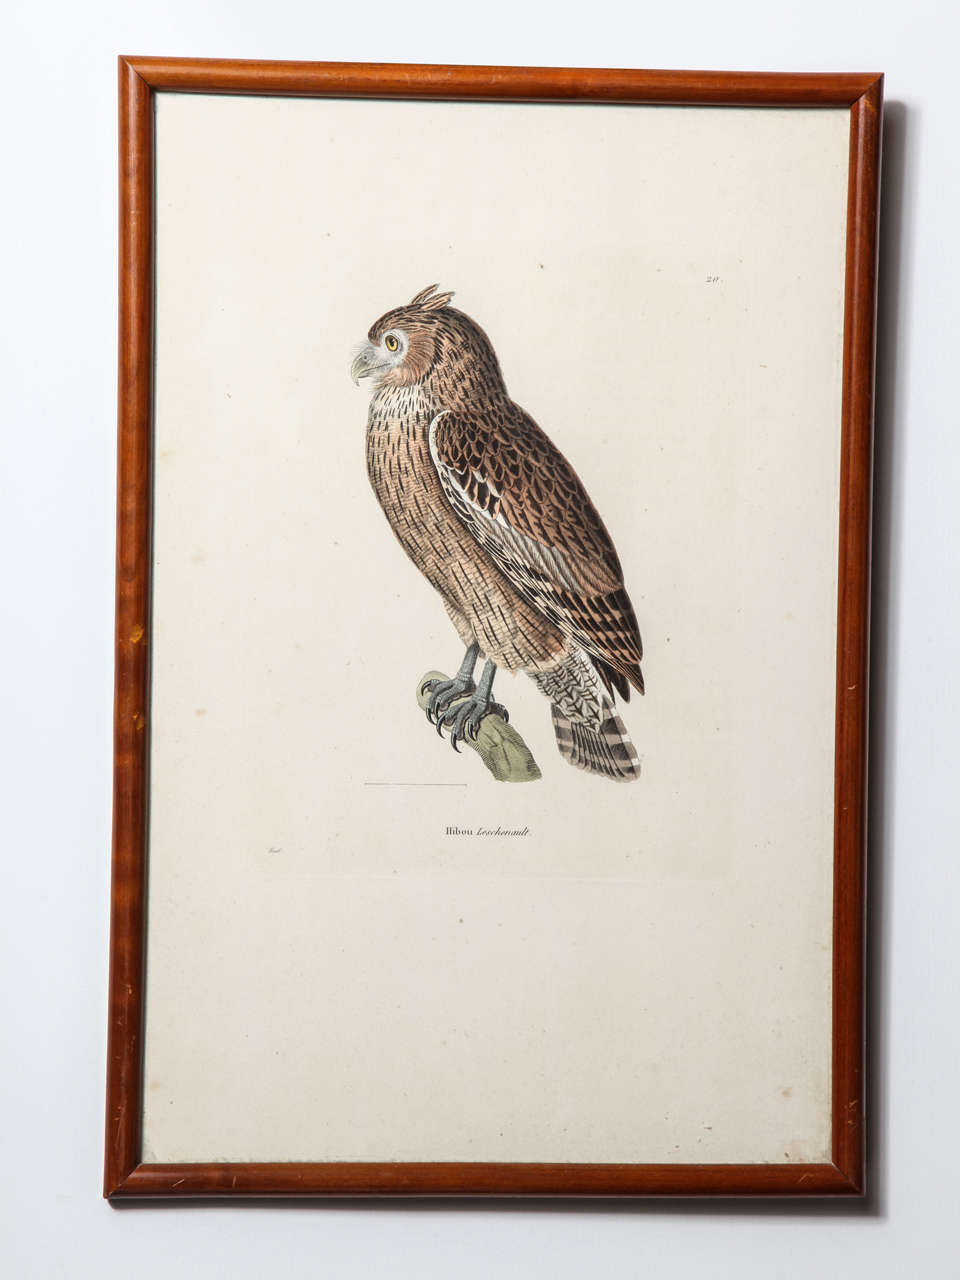 French A 19th Century Owl Etching by G. Hullmandel, after J. Gould. France